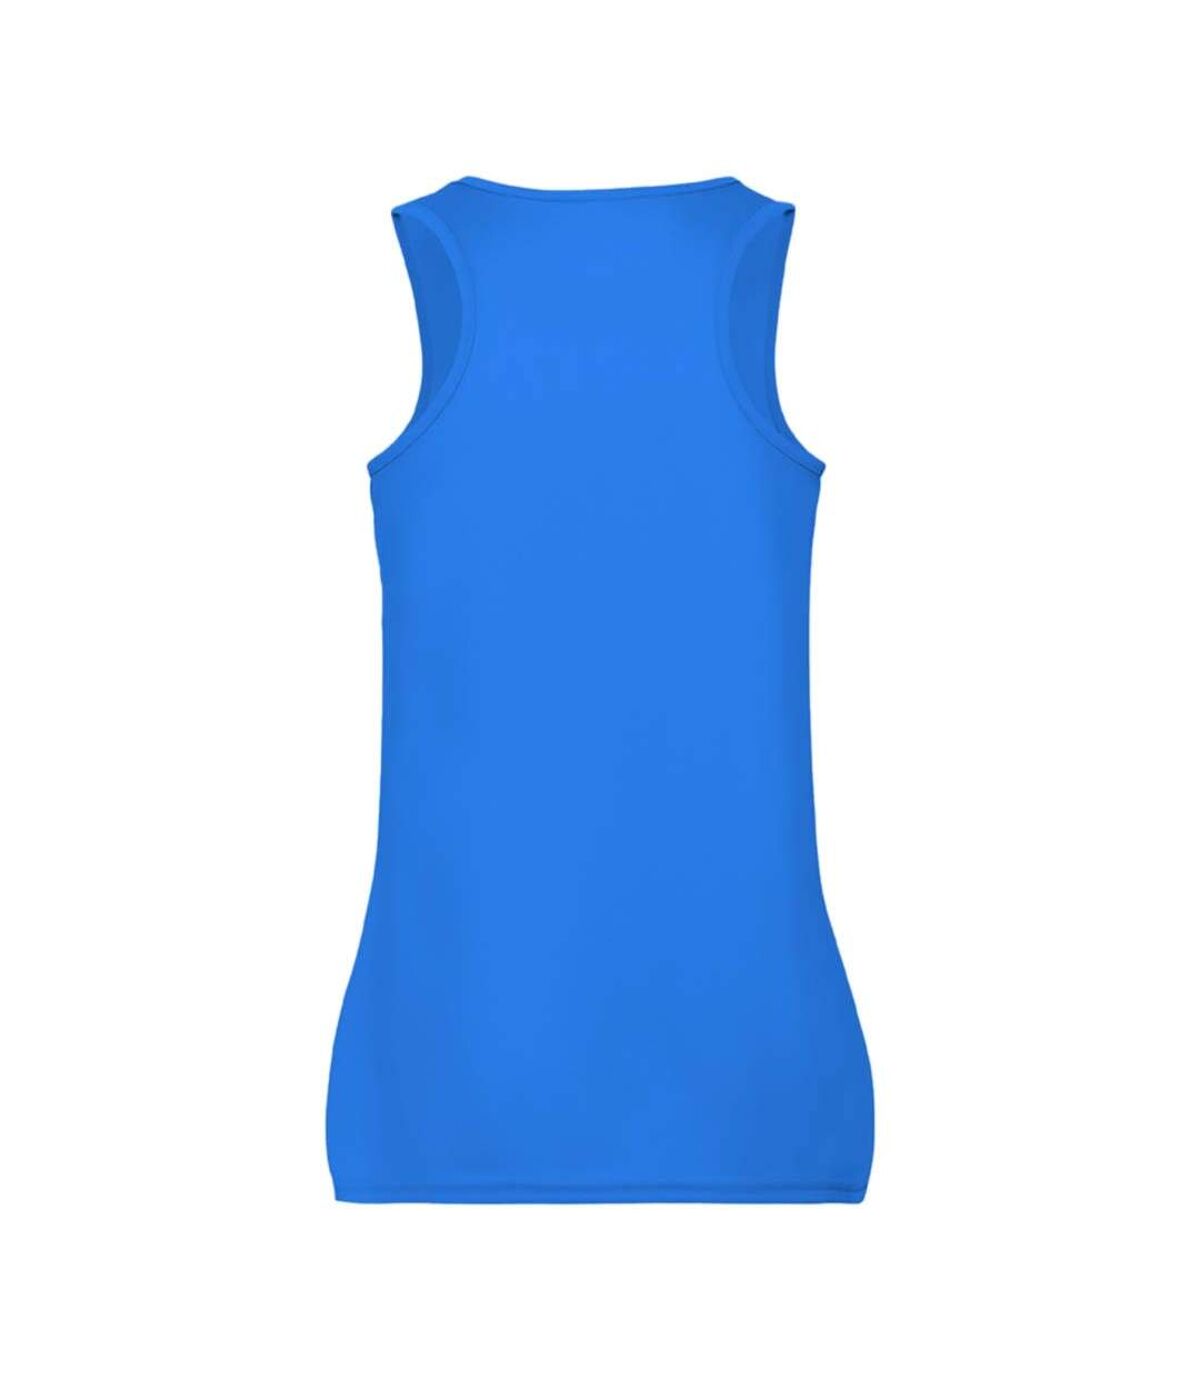 Fruit Of The Loom Mens Moisture Wicking Performance Vest Top (Royal Blue)